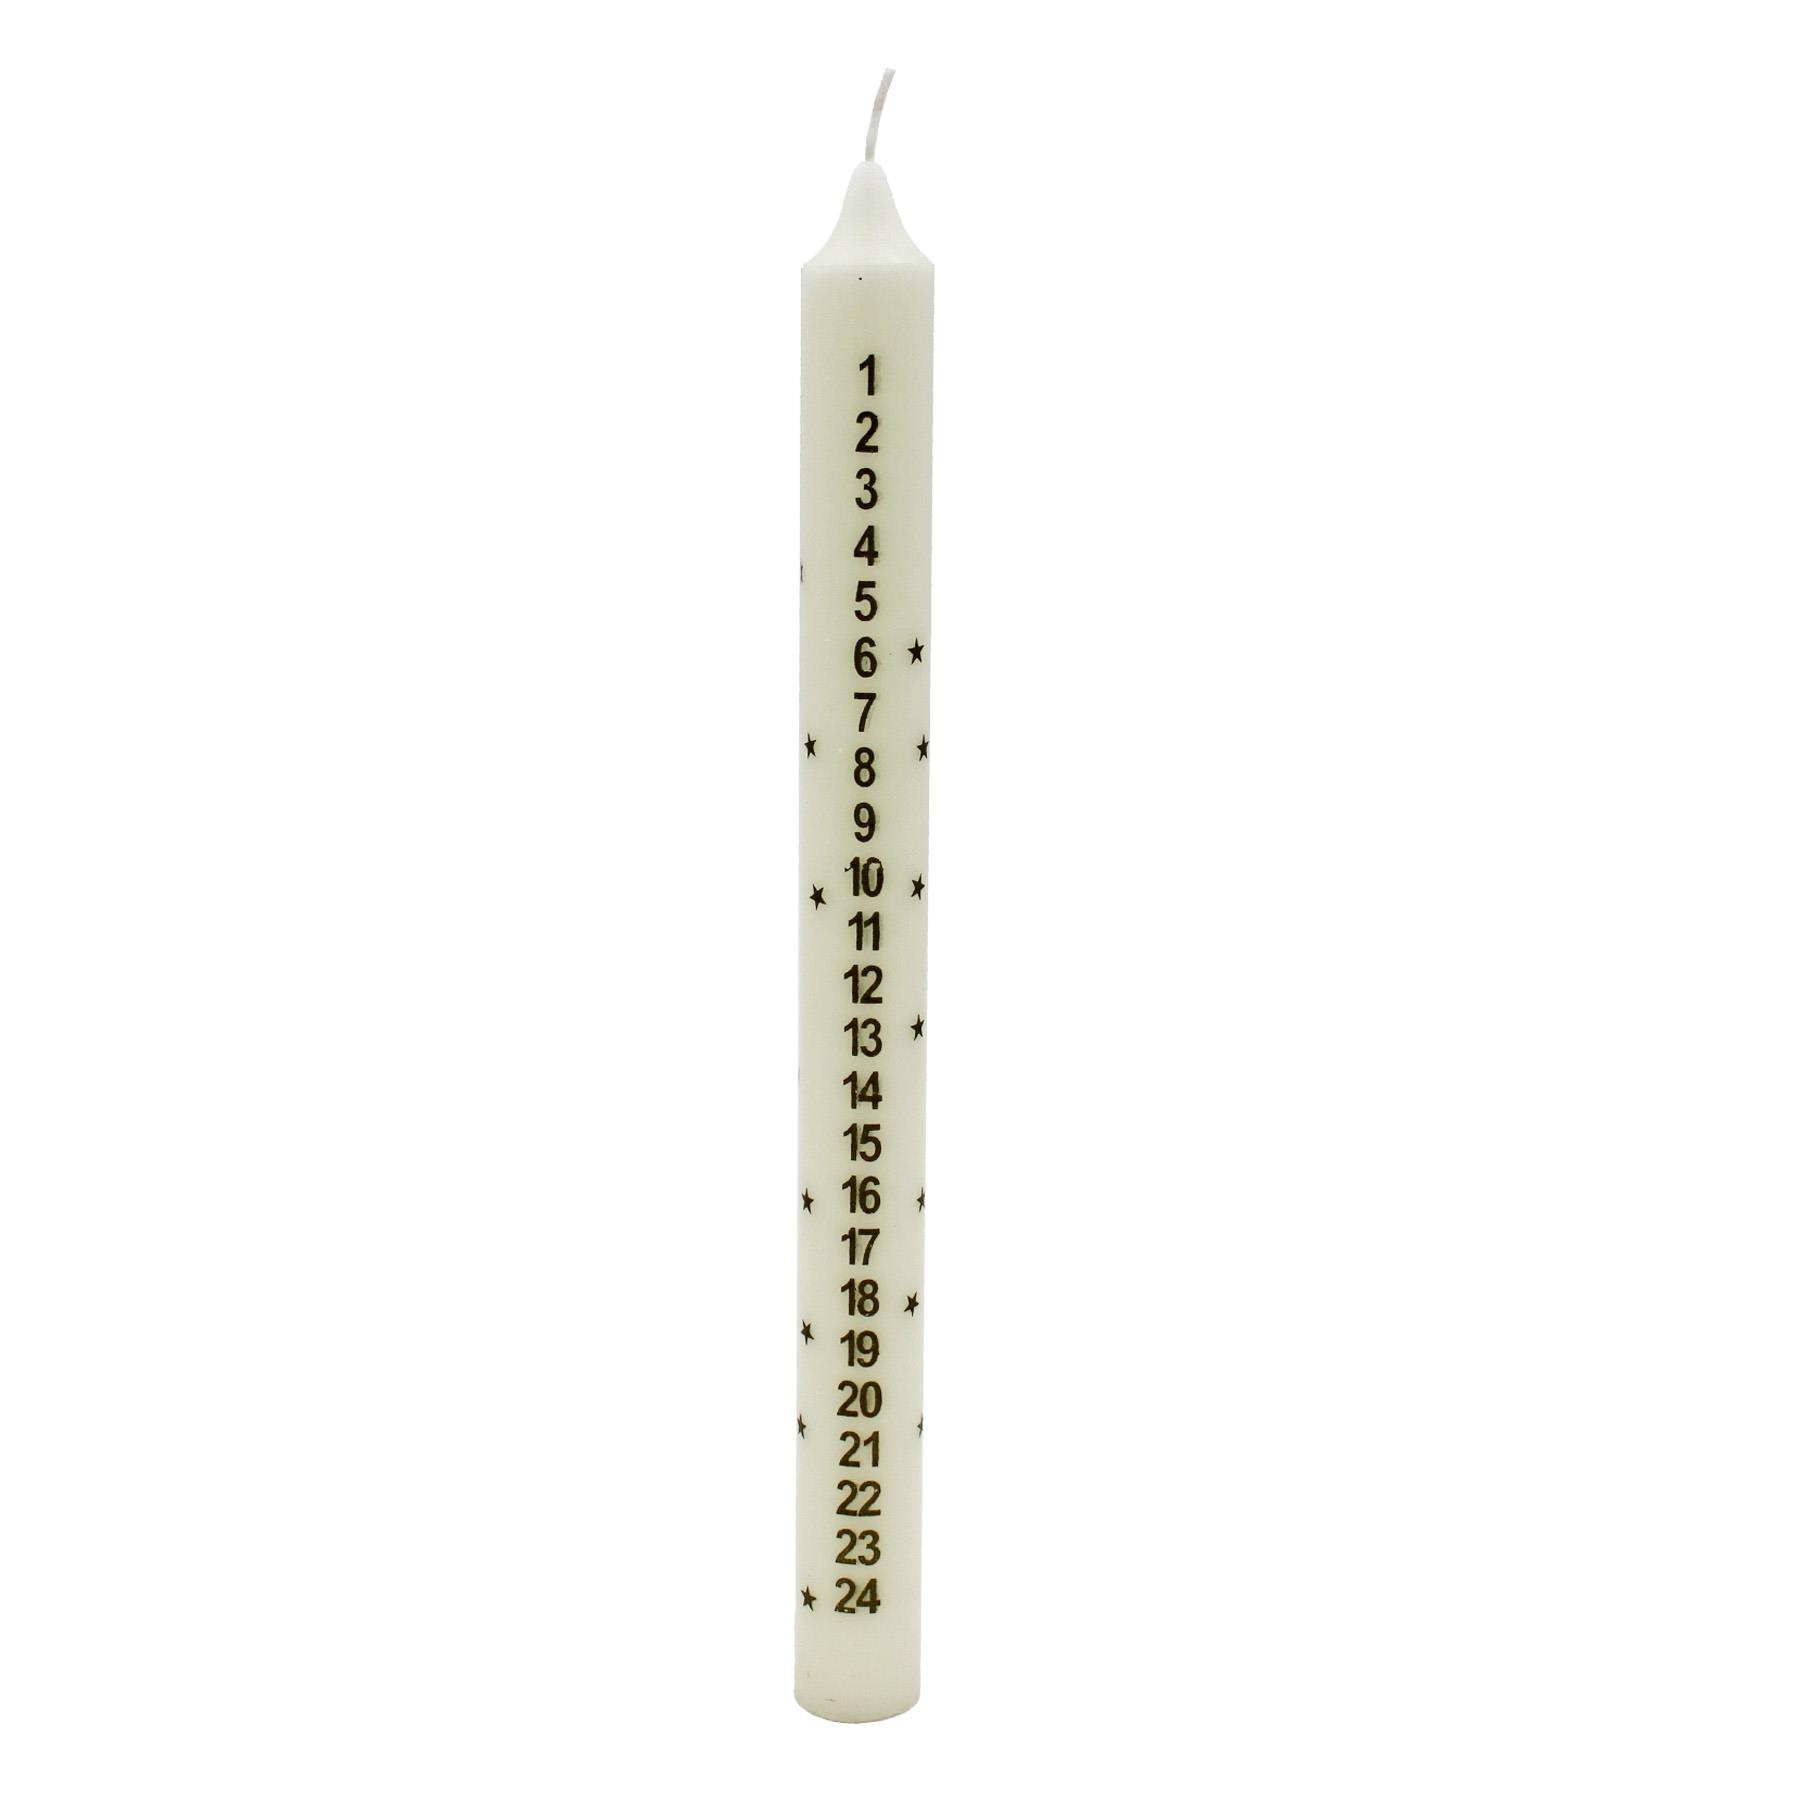 Christmas Tapered Countdown Advent Candle / Candle Holder - Choose Item